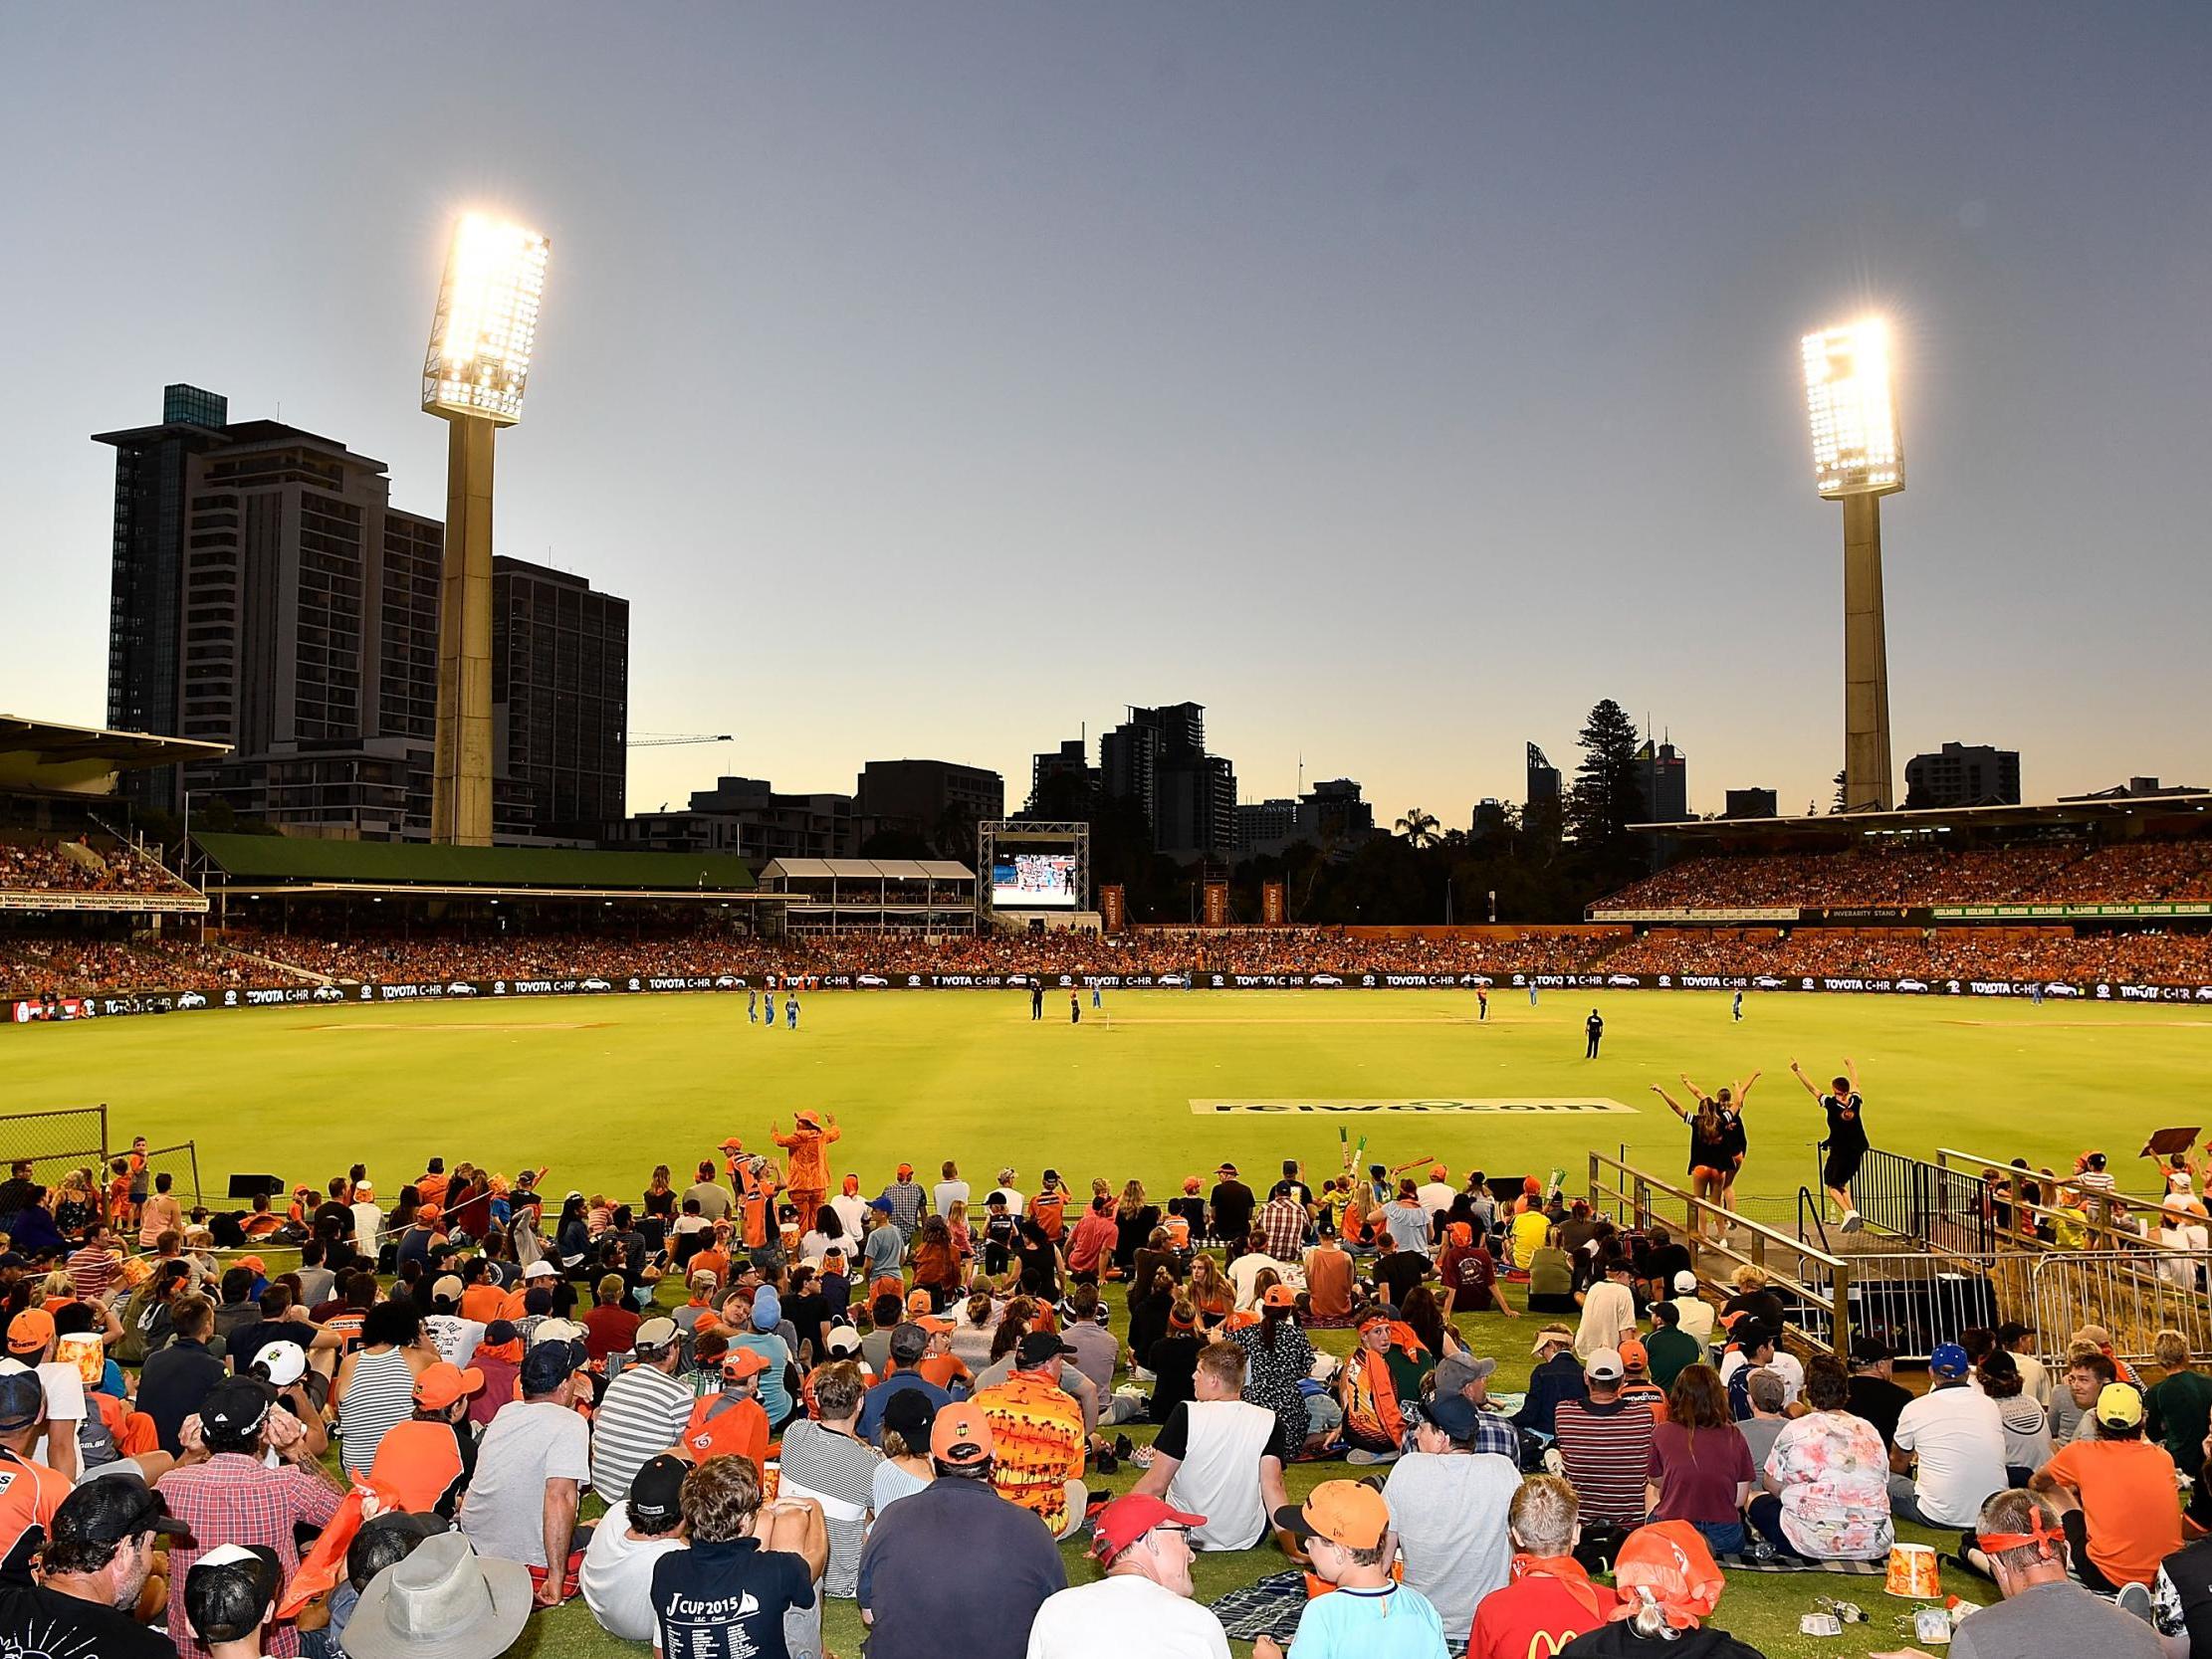 Australia's Big Bash is wildly popular with fans